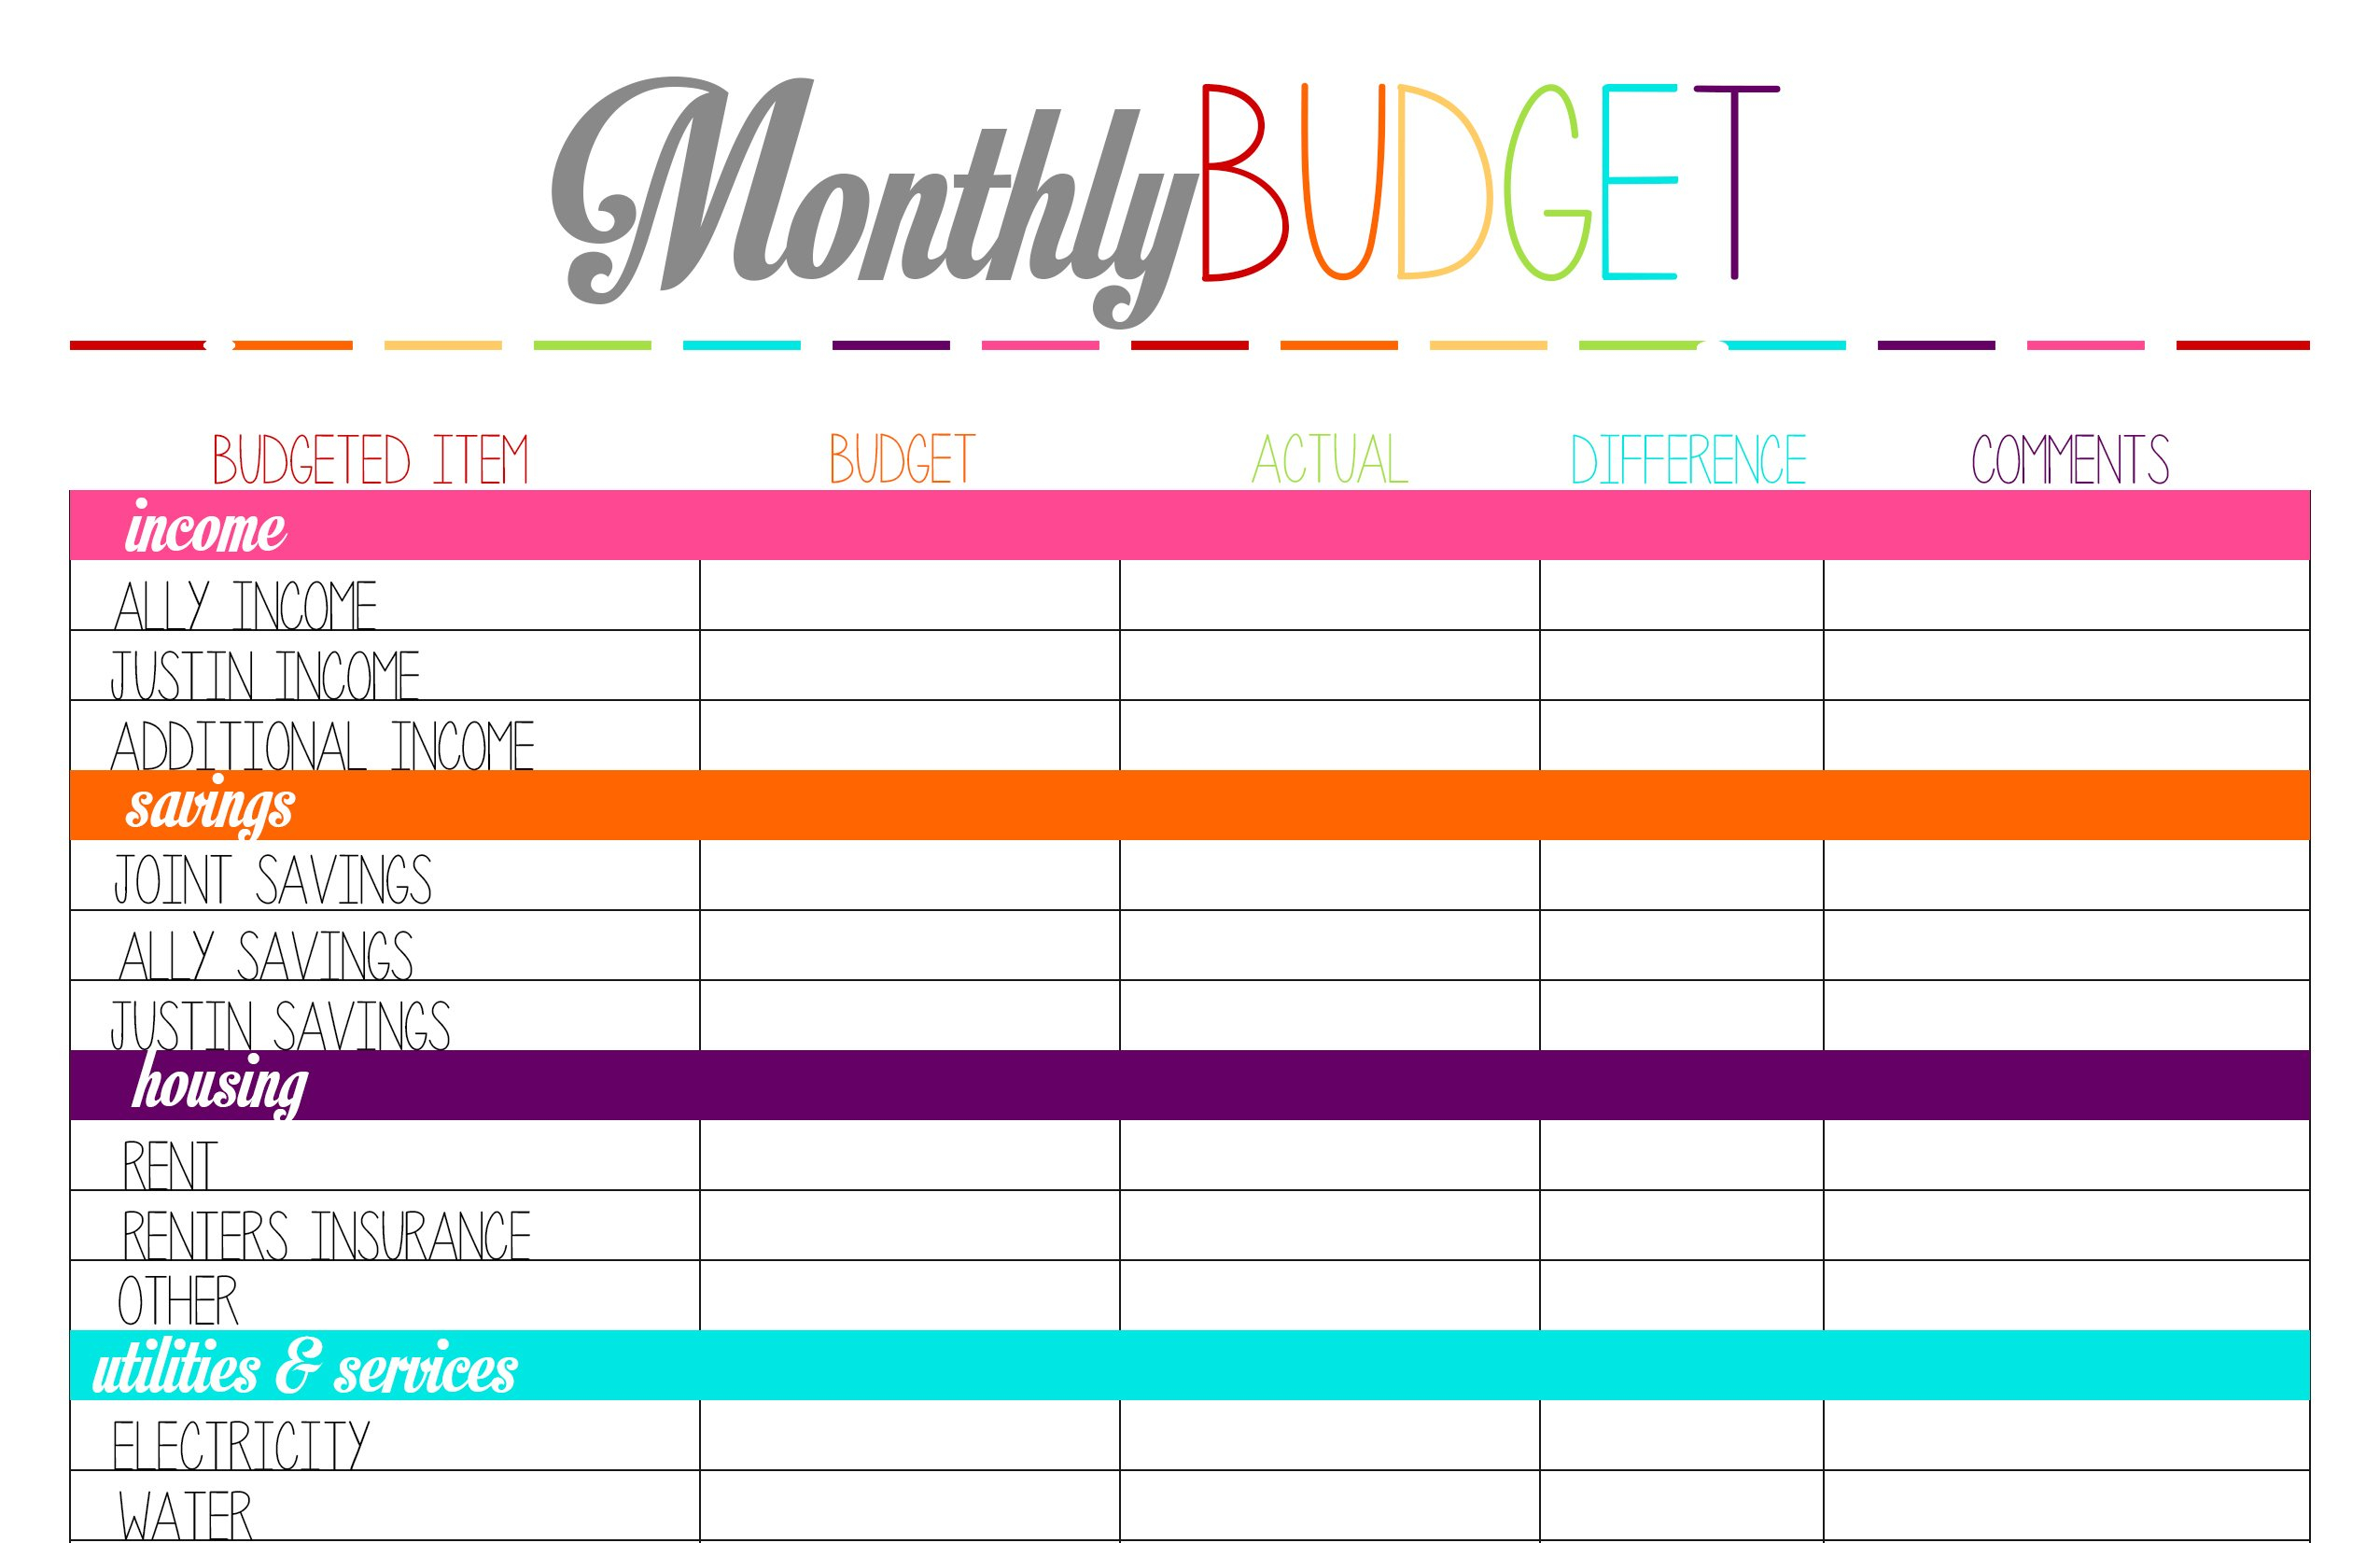 004 Plans Budget Closeup Planner Free Unusual Template Plan For Budget Planner Worksheet